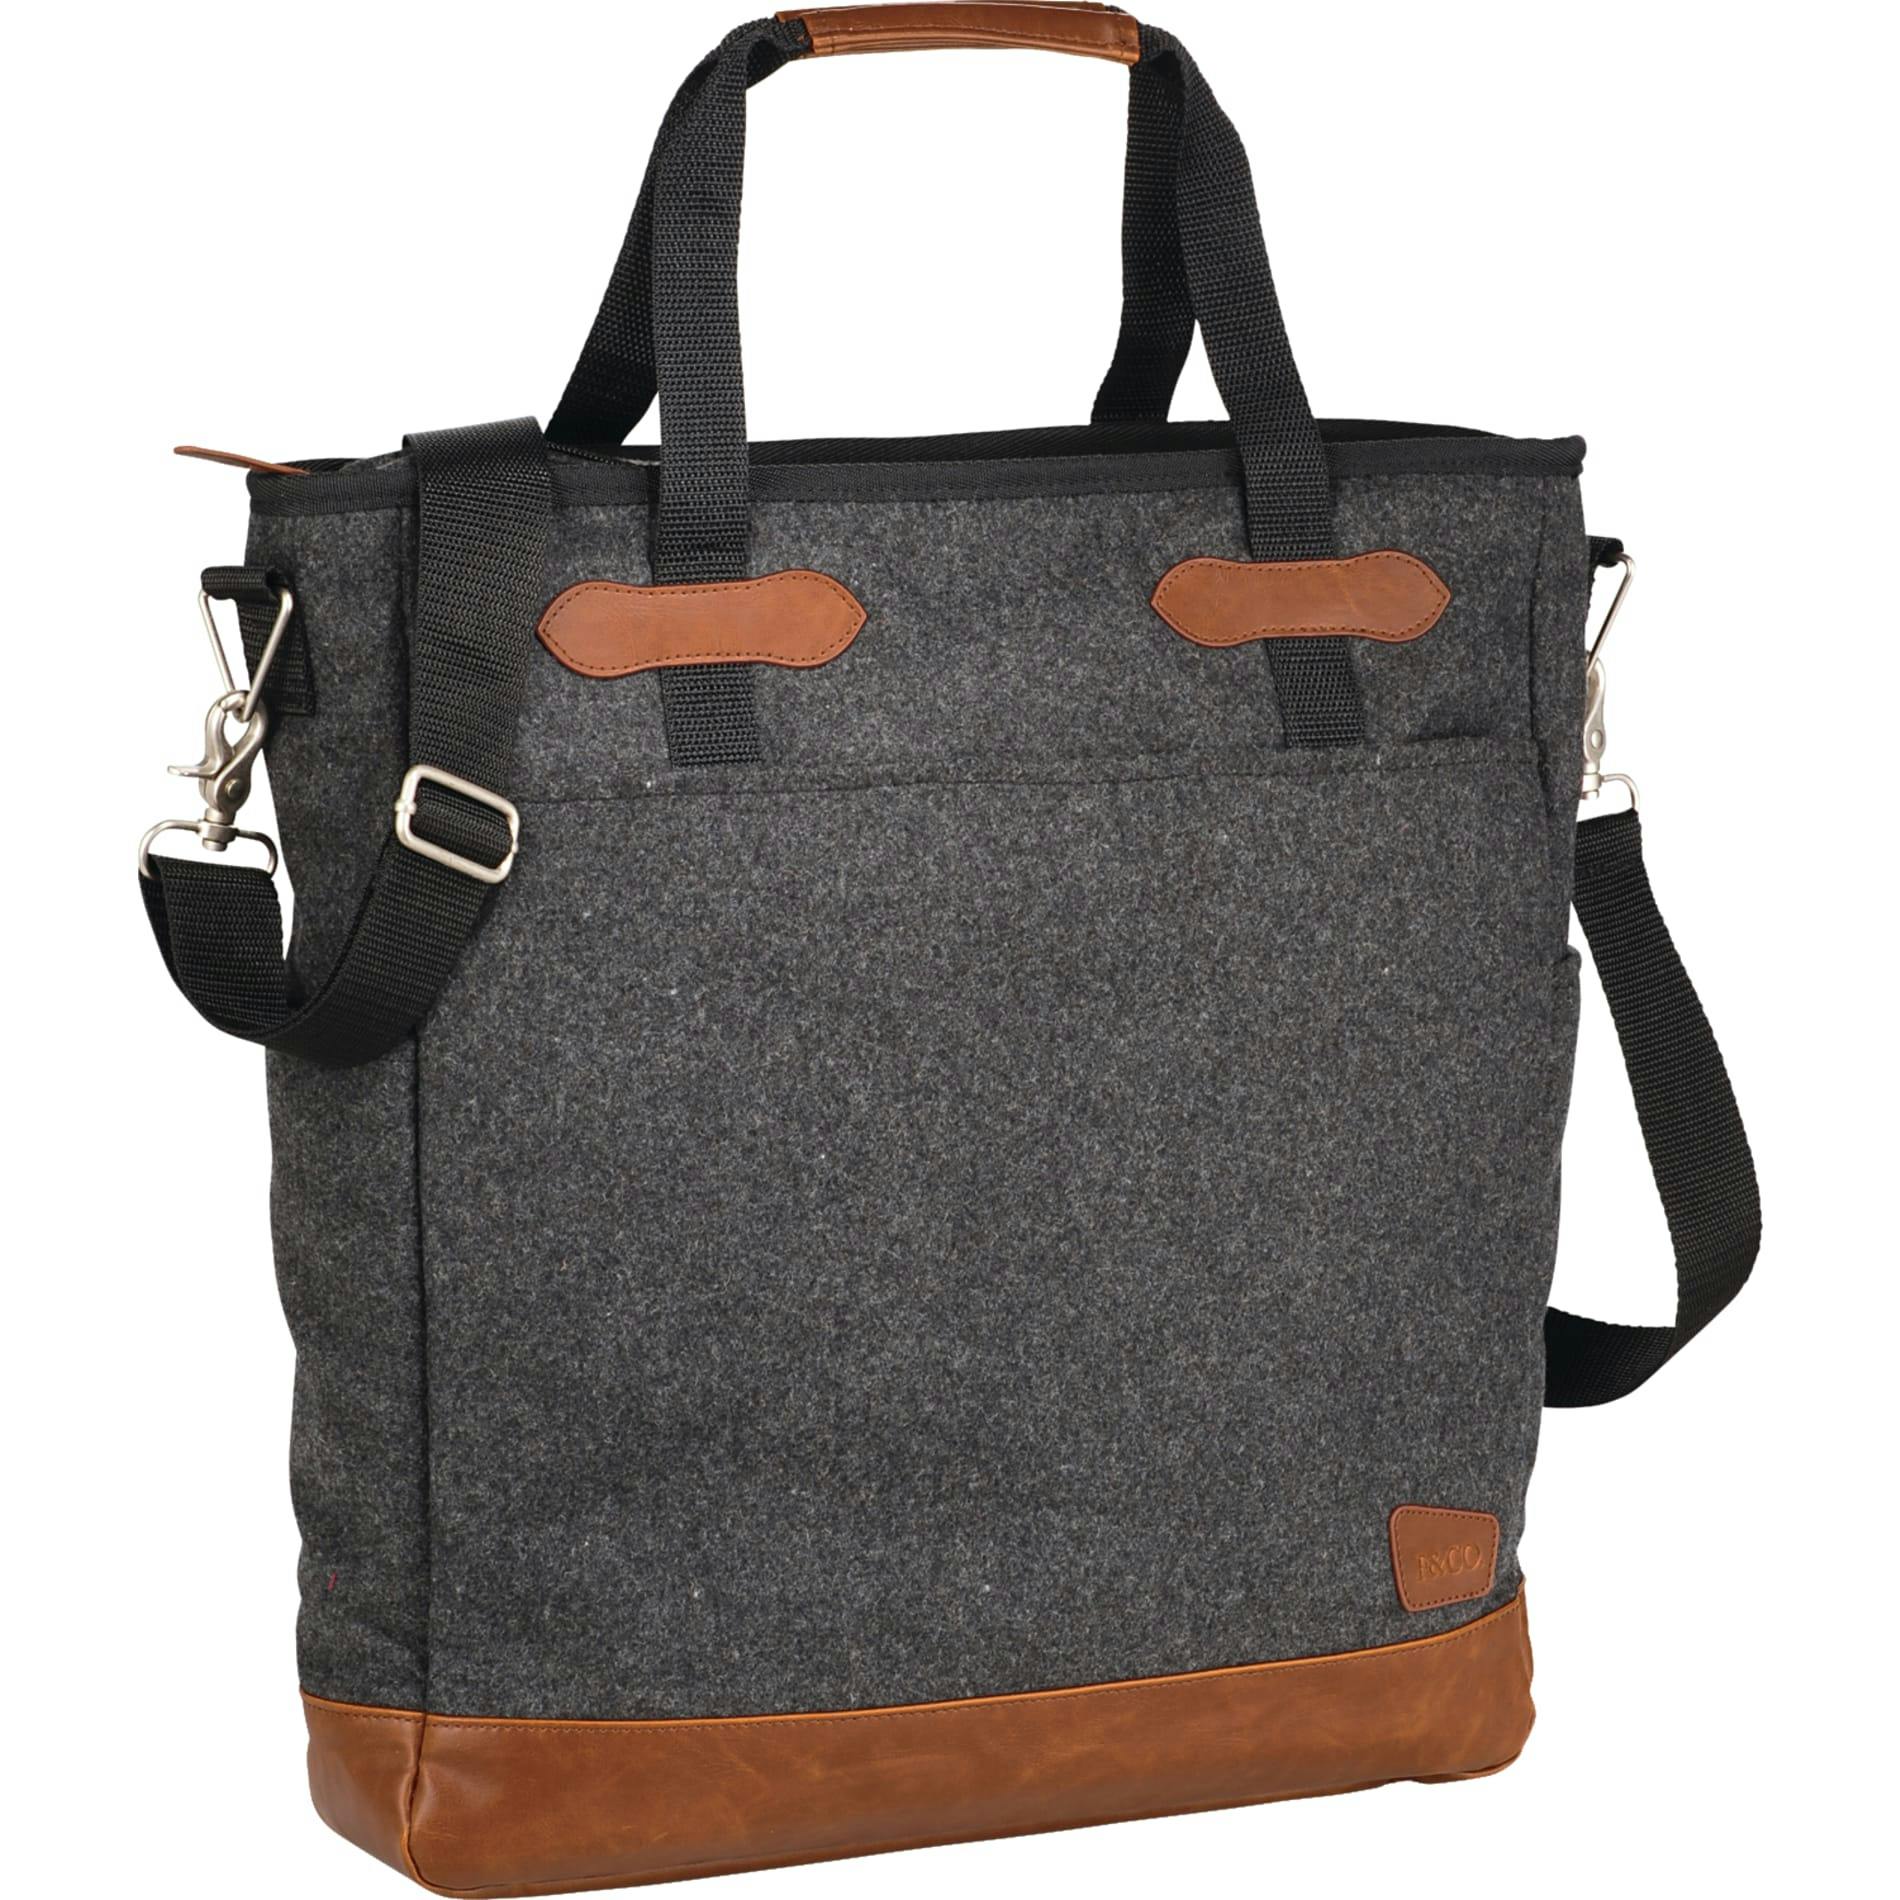 Field & Co.® Campster Wool 15" Computer Tote - additional Image 4